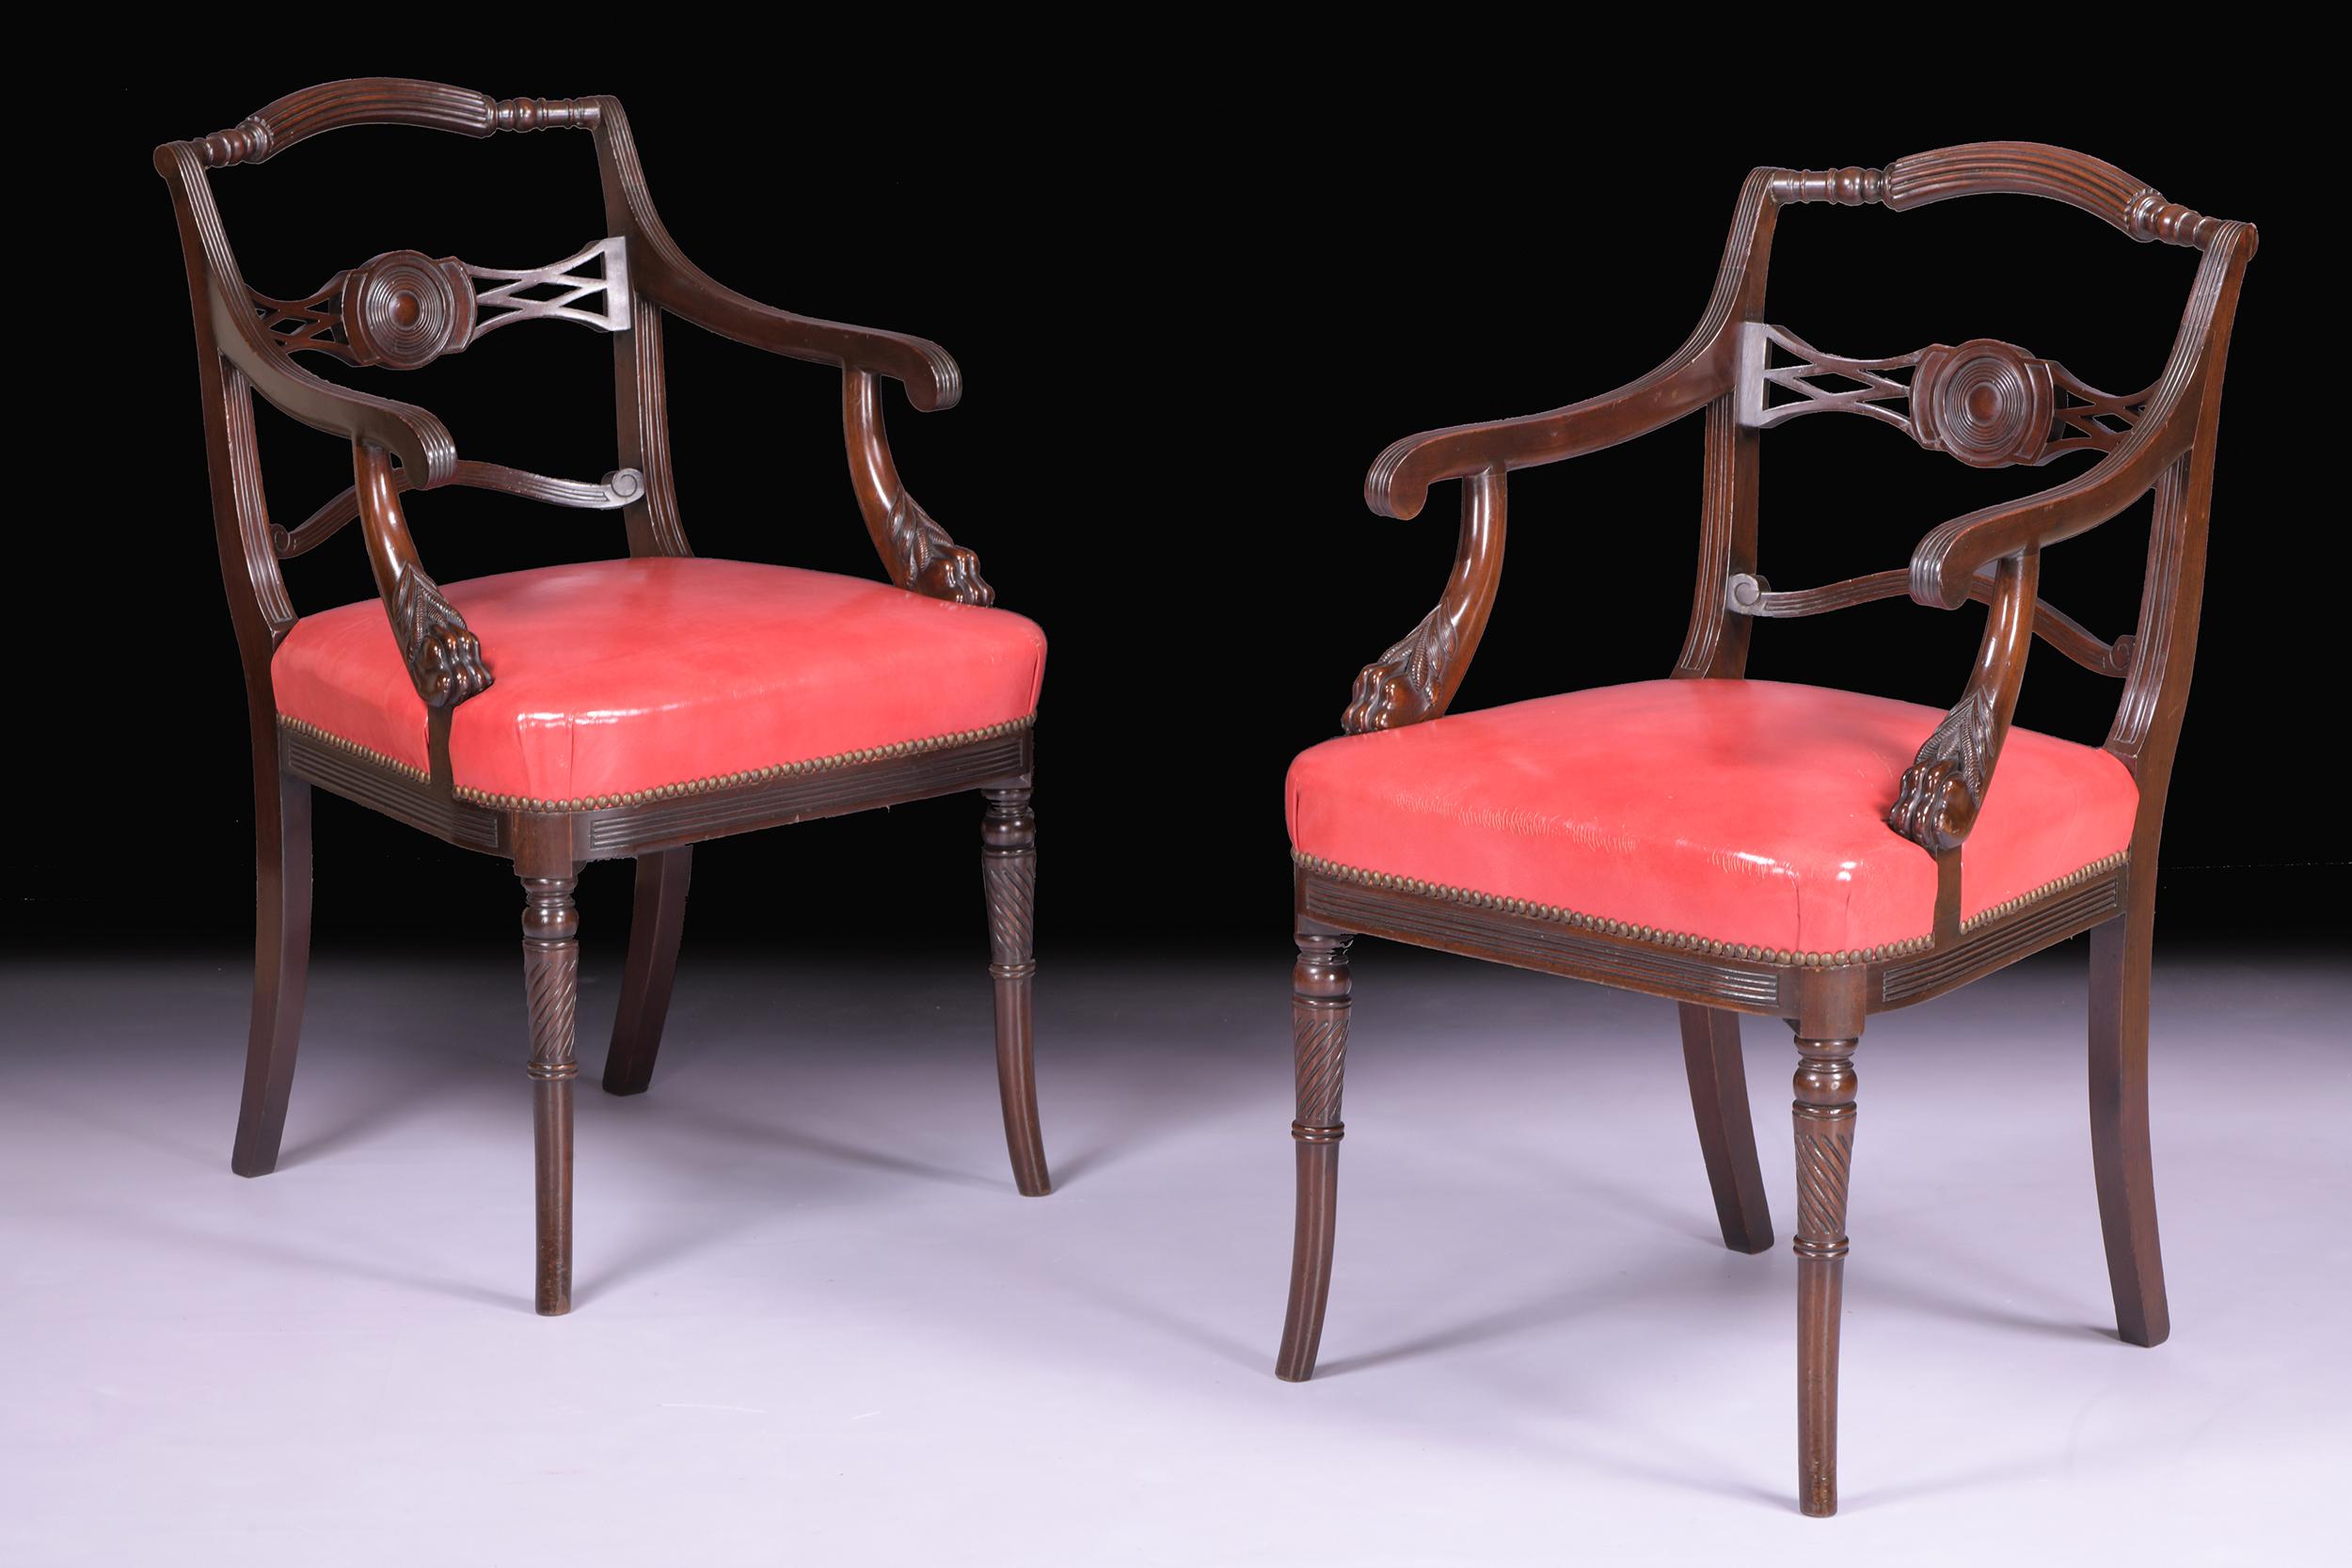 A superb pair of Irish Regency mahogany armchairs attributed to Mack, Williams and Gibton, the arched reeded crest rails above open frames with lattice-work back rails, each with arm supports terminating in carved paw feet, the seats upholstered in